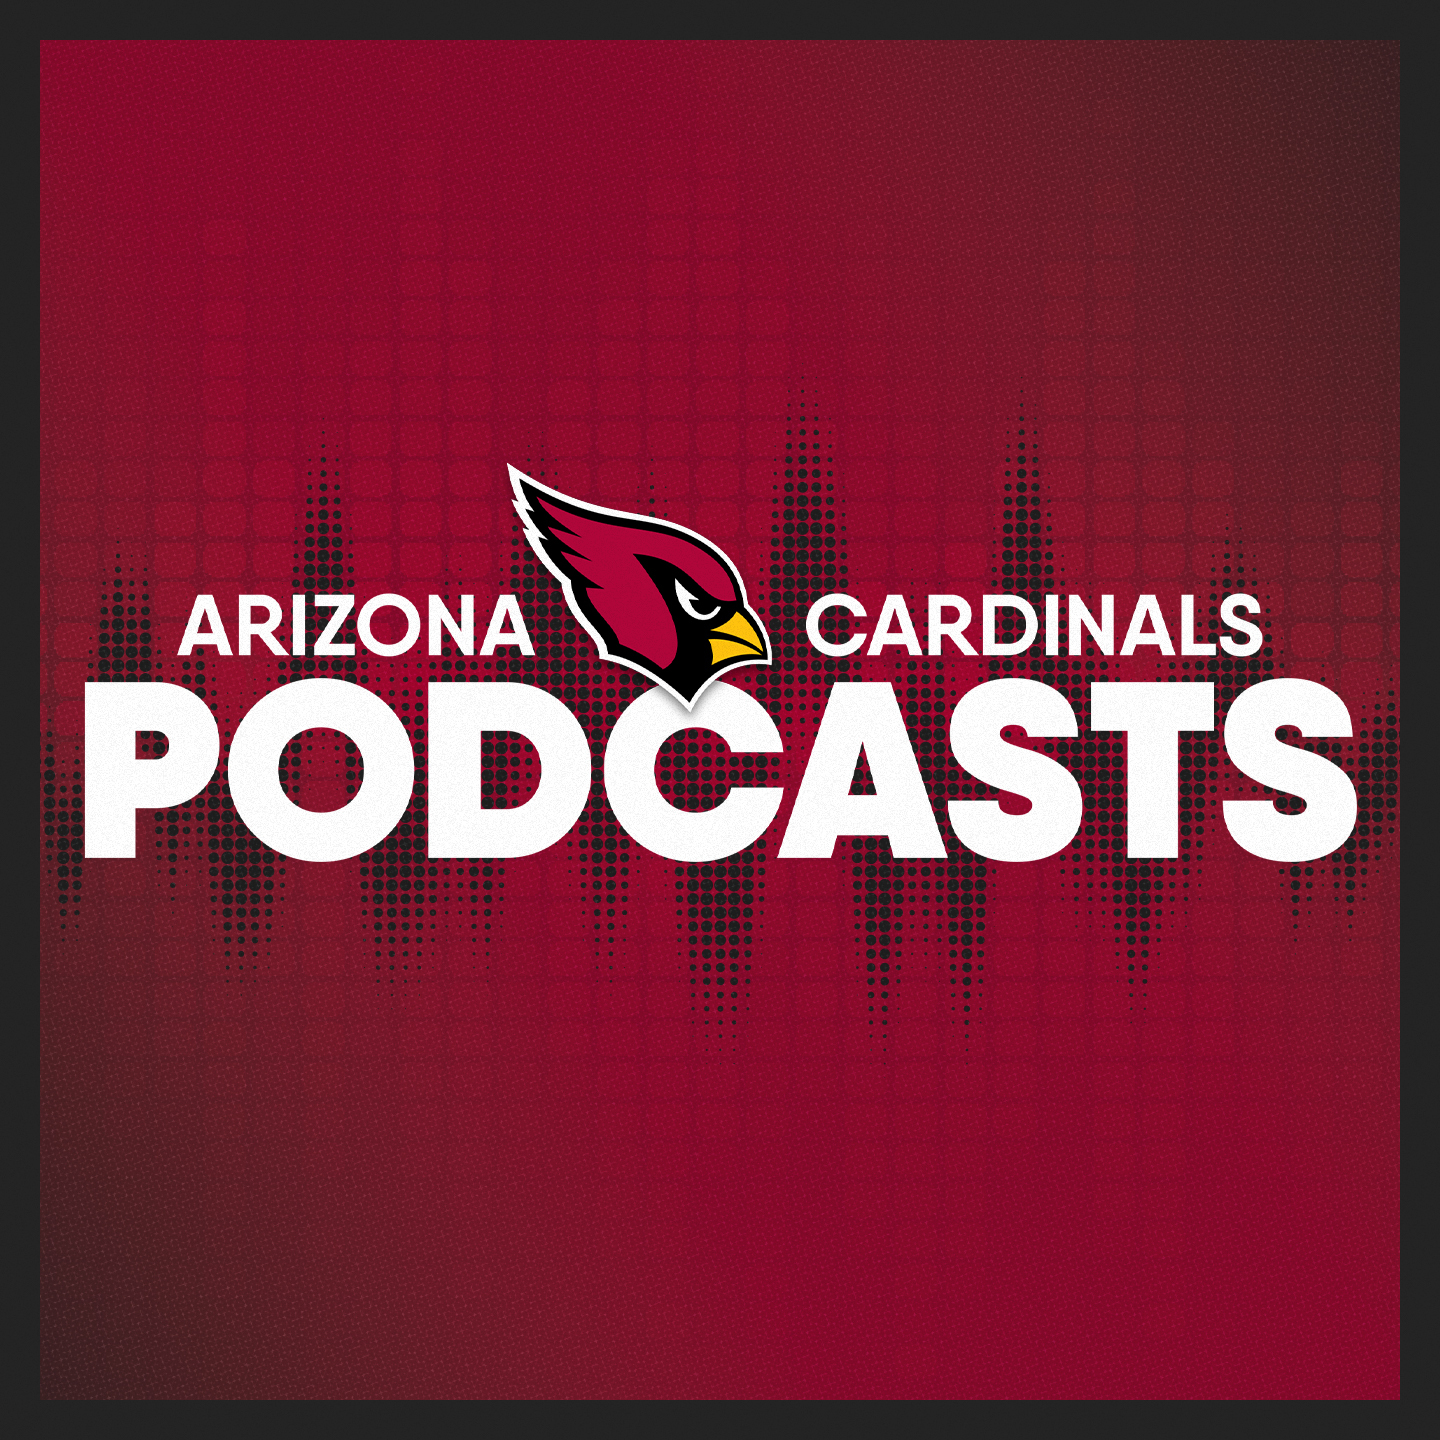 Cardinals Cover 2 - Health Tops Winning Division